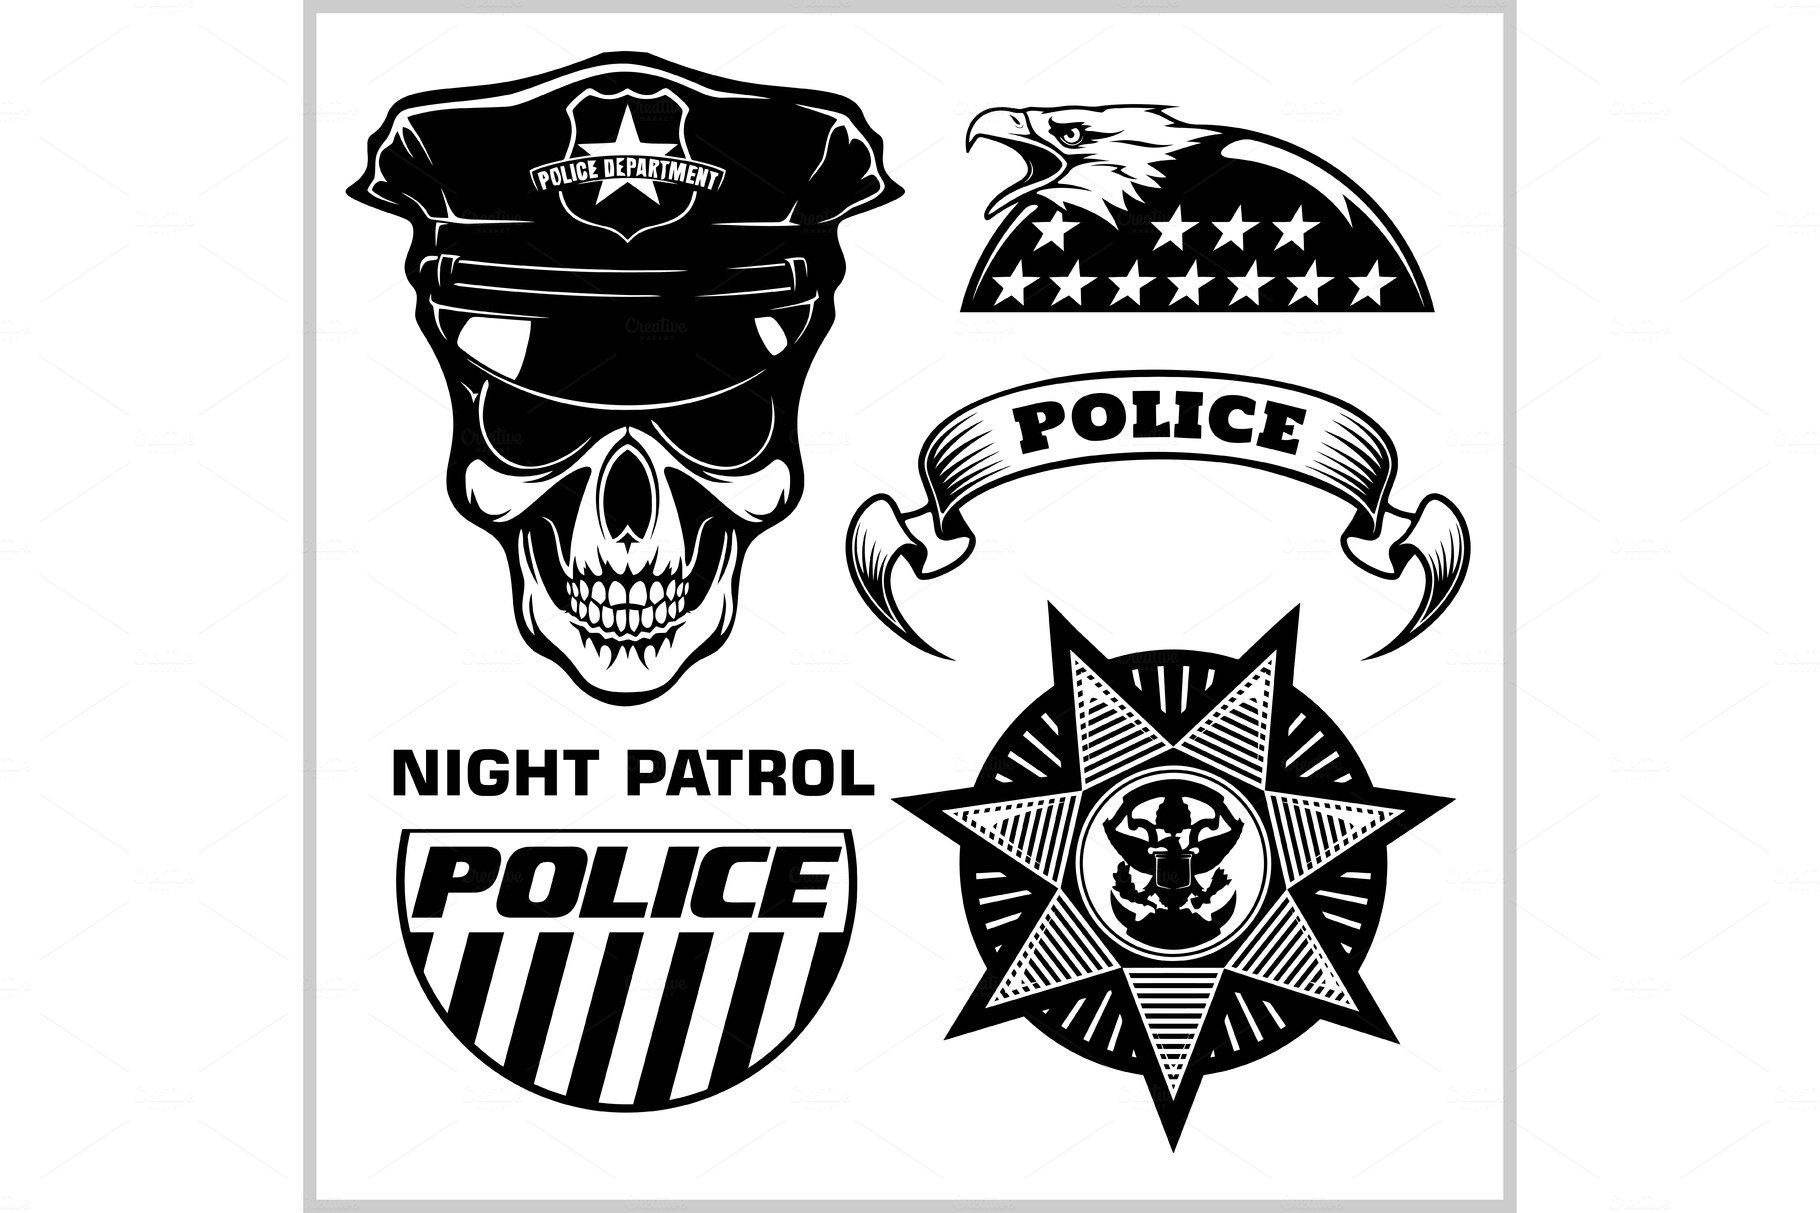 Police badges and design elements - cover image.